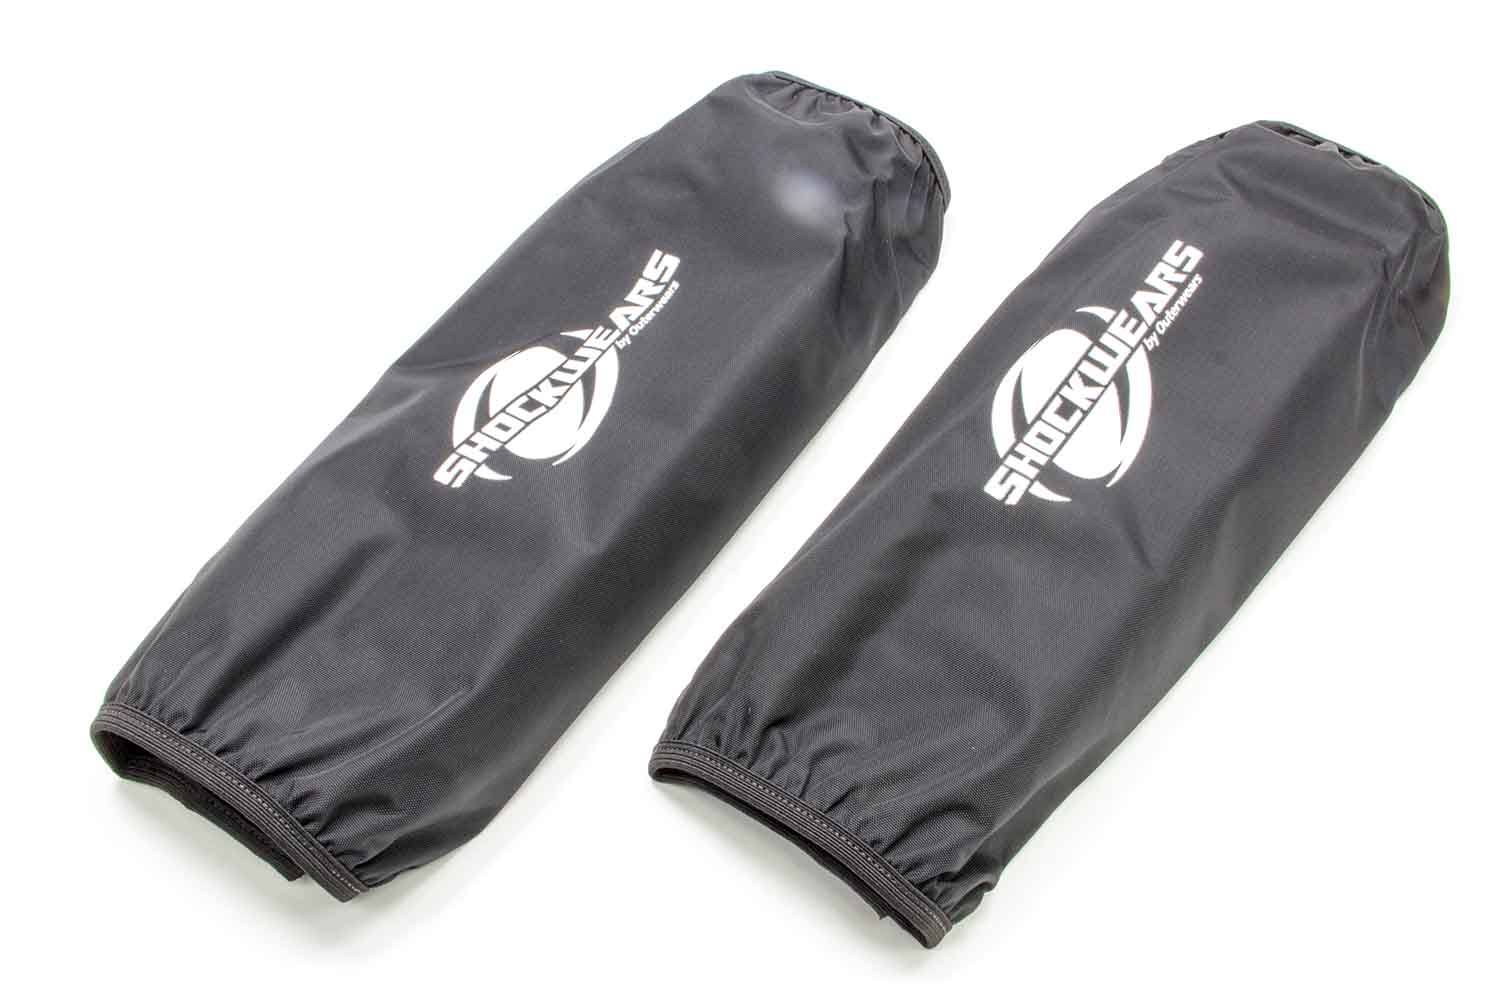 Outerwears Shock Cover Shockwears 10 in Long 3.500 in OD Polyester… 30-1245-01